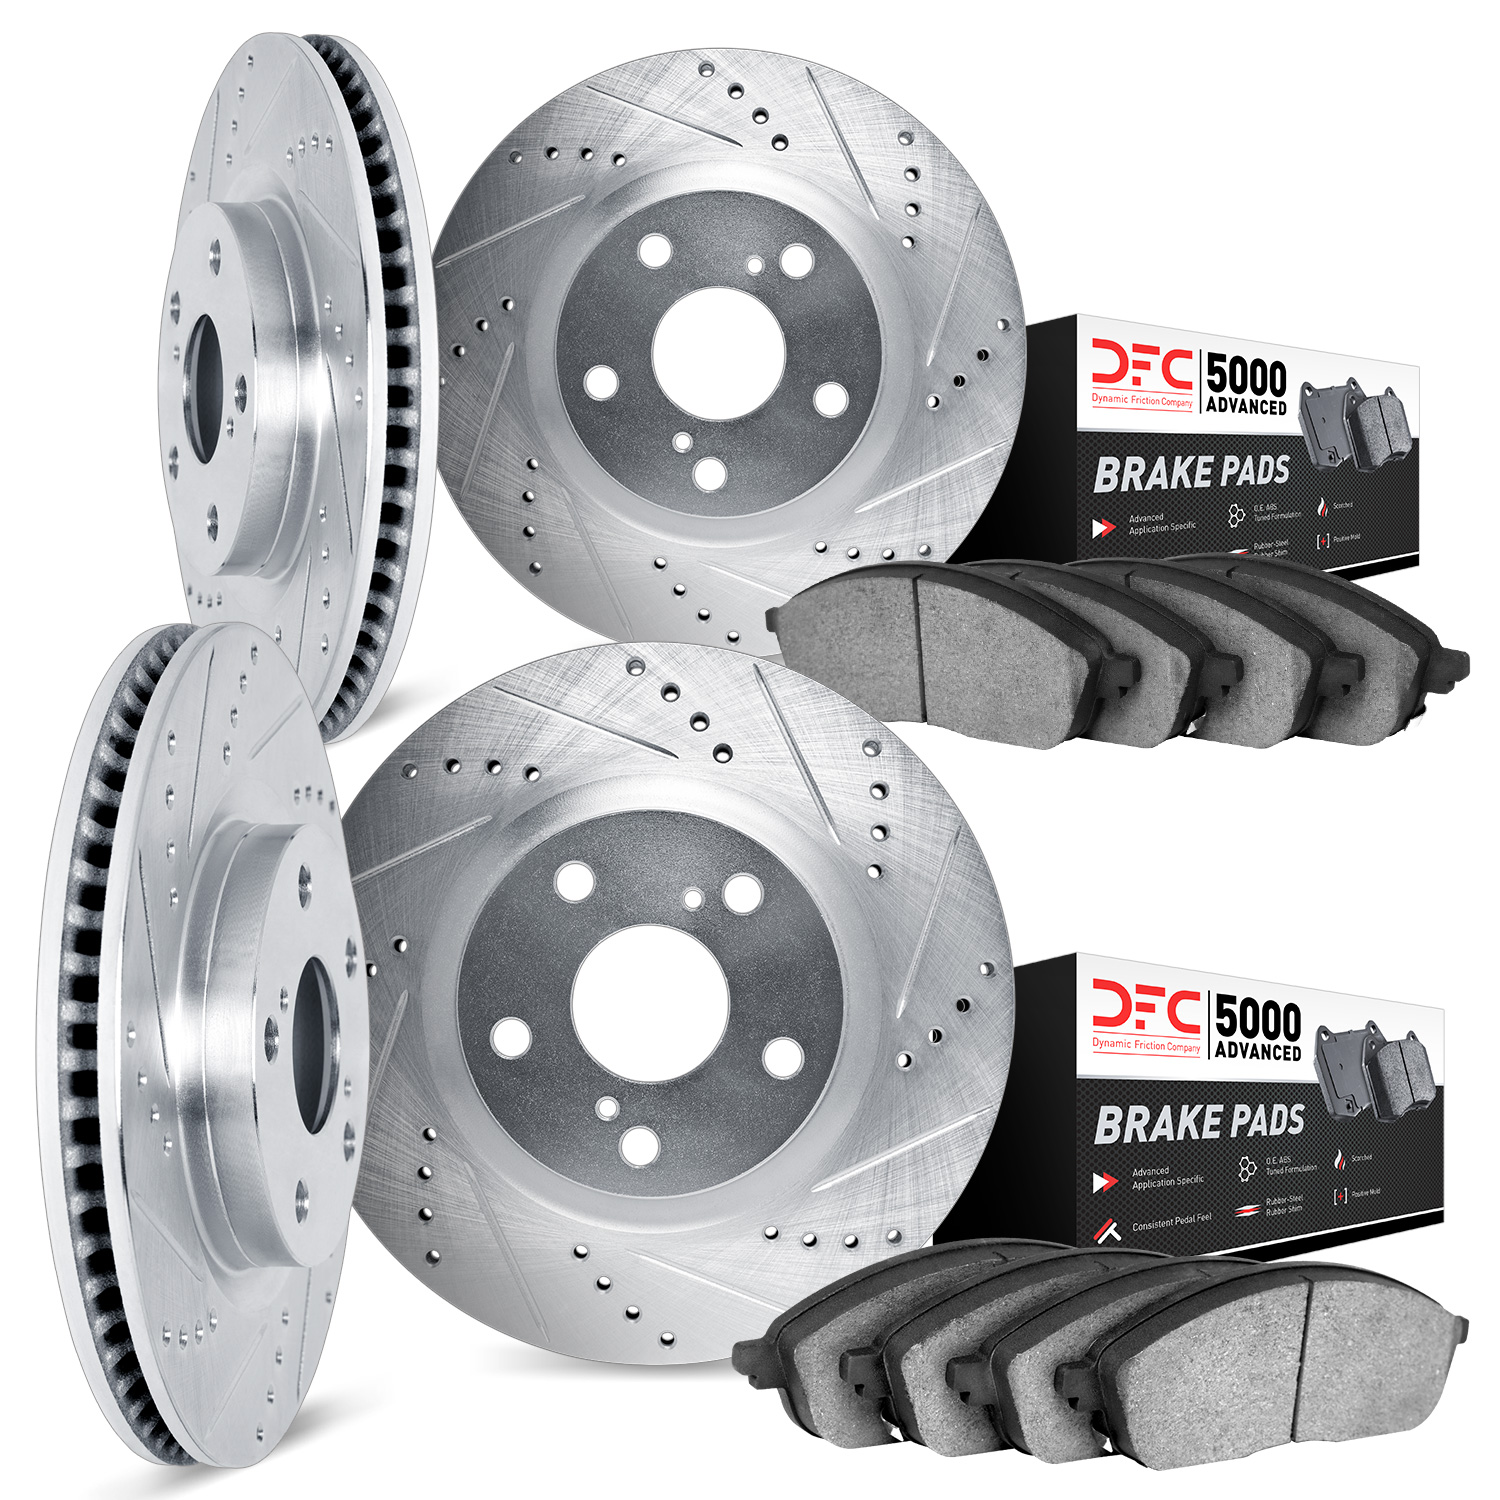 7504-46031 Drilled/Slotted Brake Rotors w/5000 Advanced Brake Pads Kit [Silver], 2013-2015 GM, Position: Front and Rear